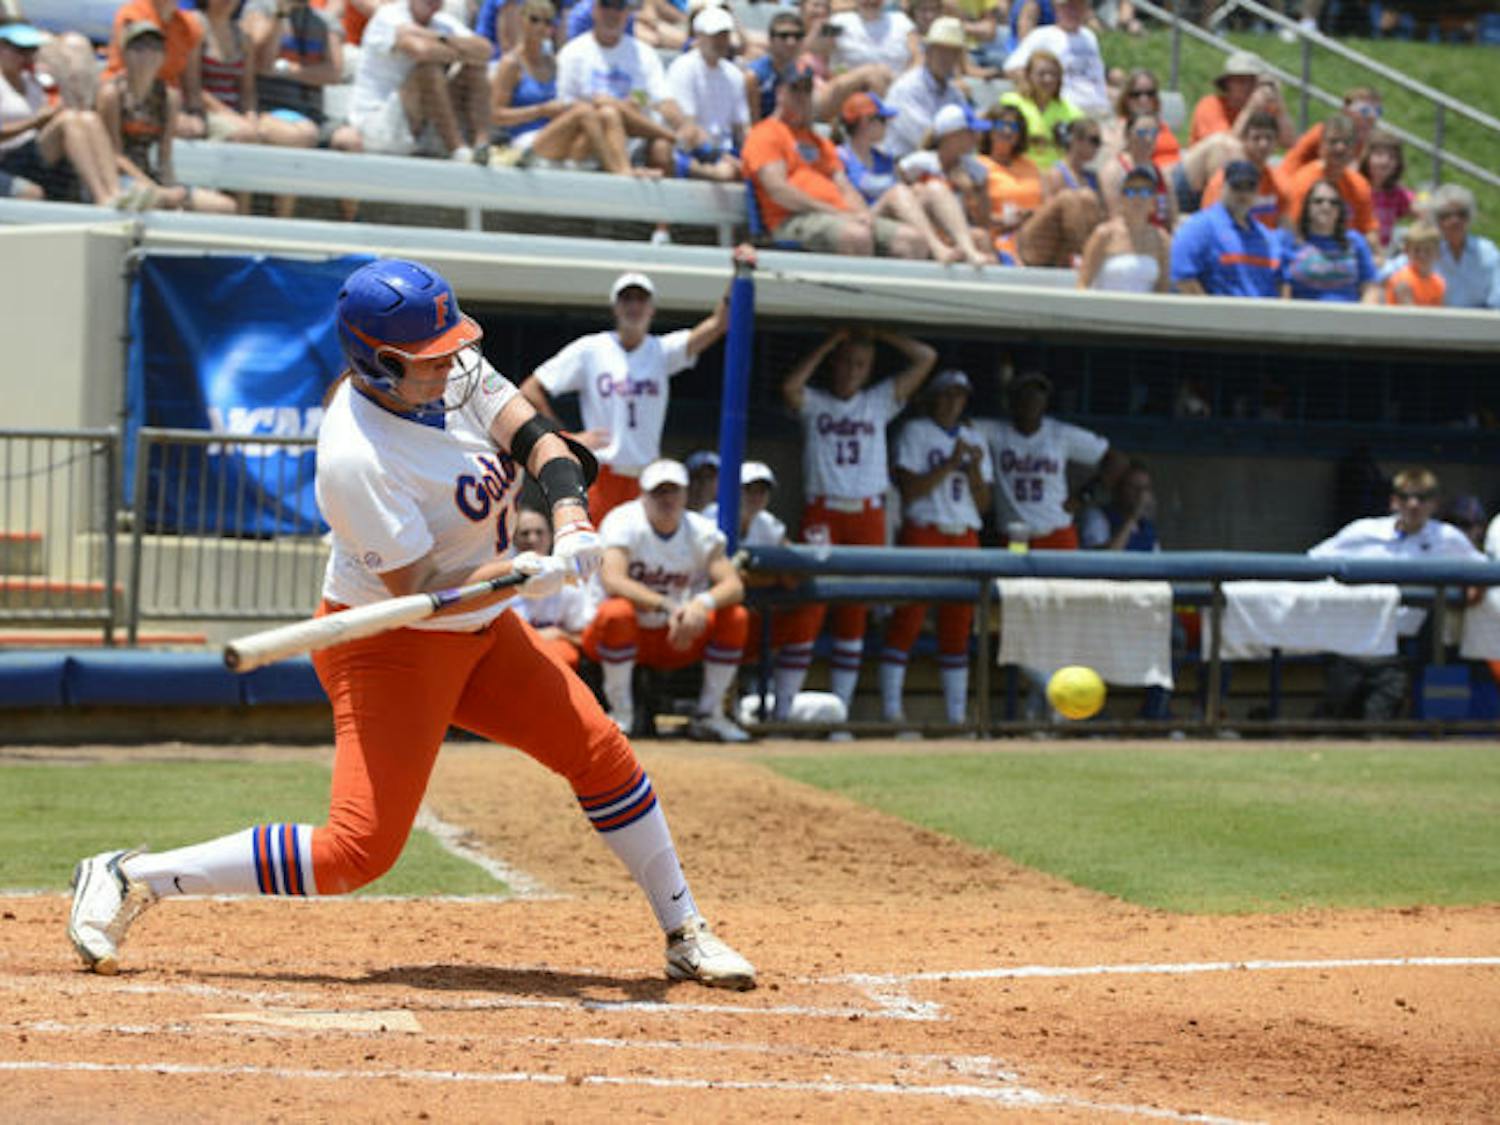 Lauren Haeger swings at a pitch during Florida’s 11-1 win against USF on May 18, 2013, at Katie Seashole Pressly Stadium.